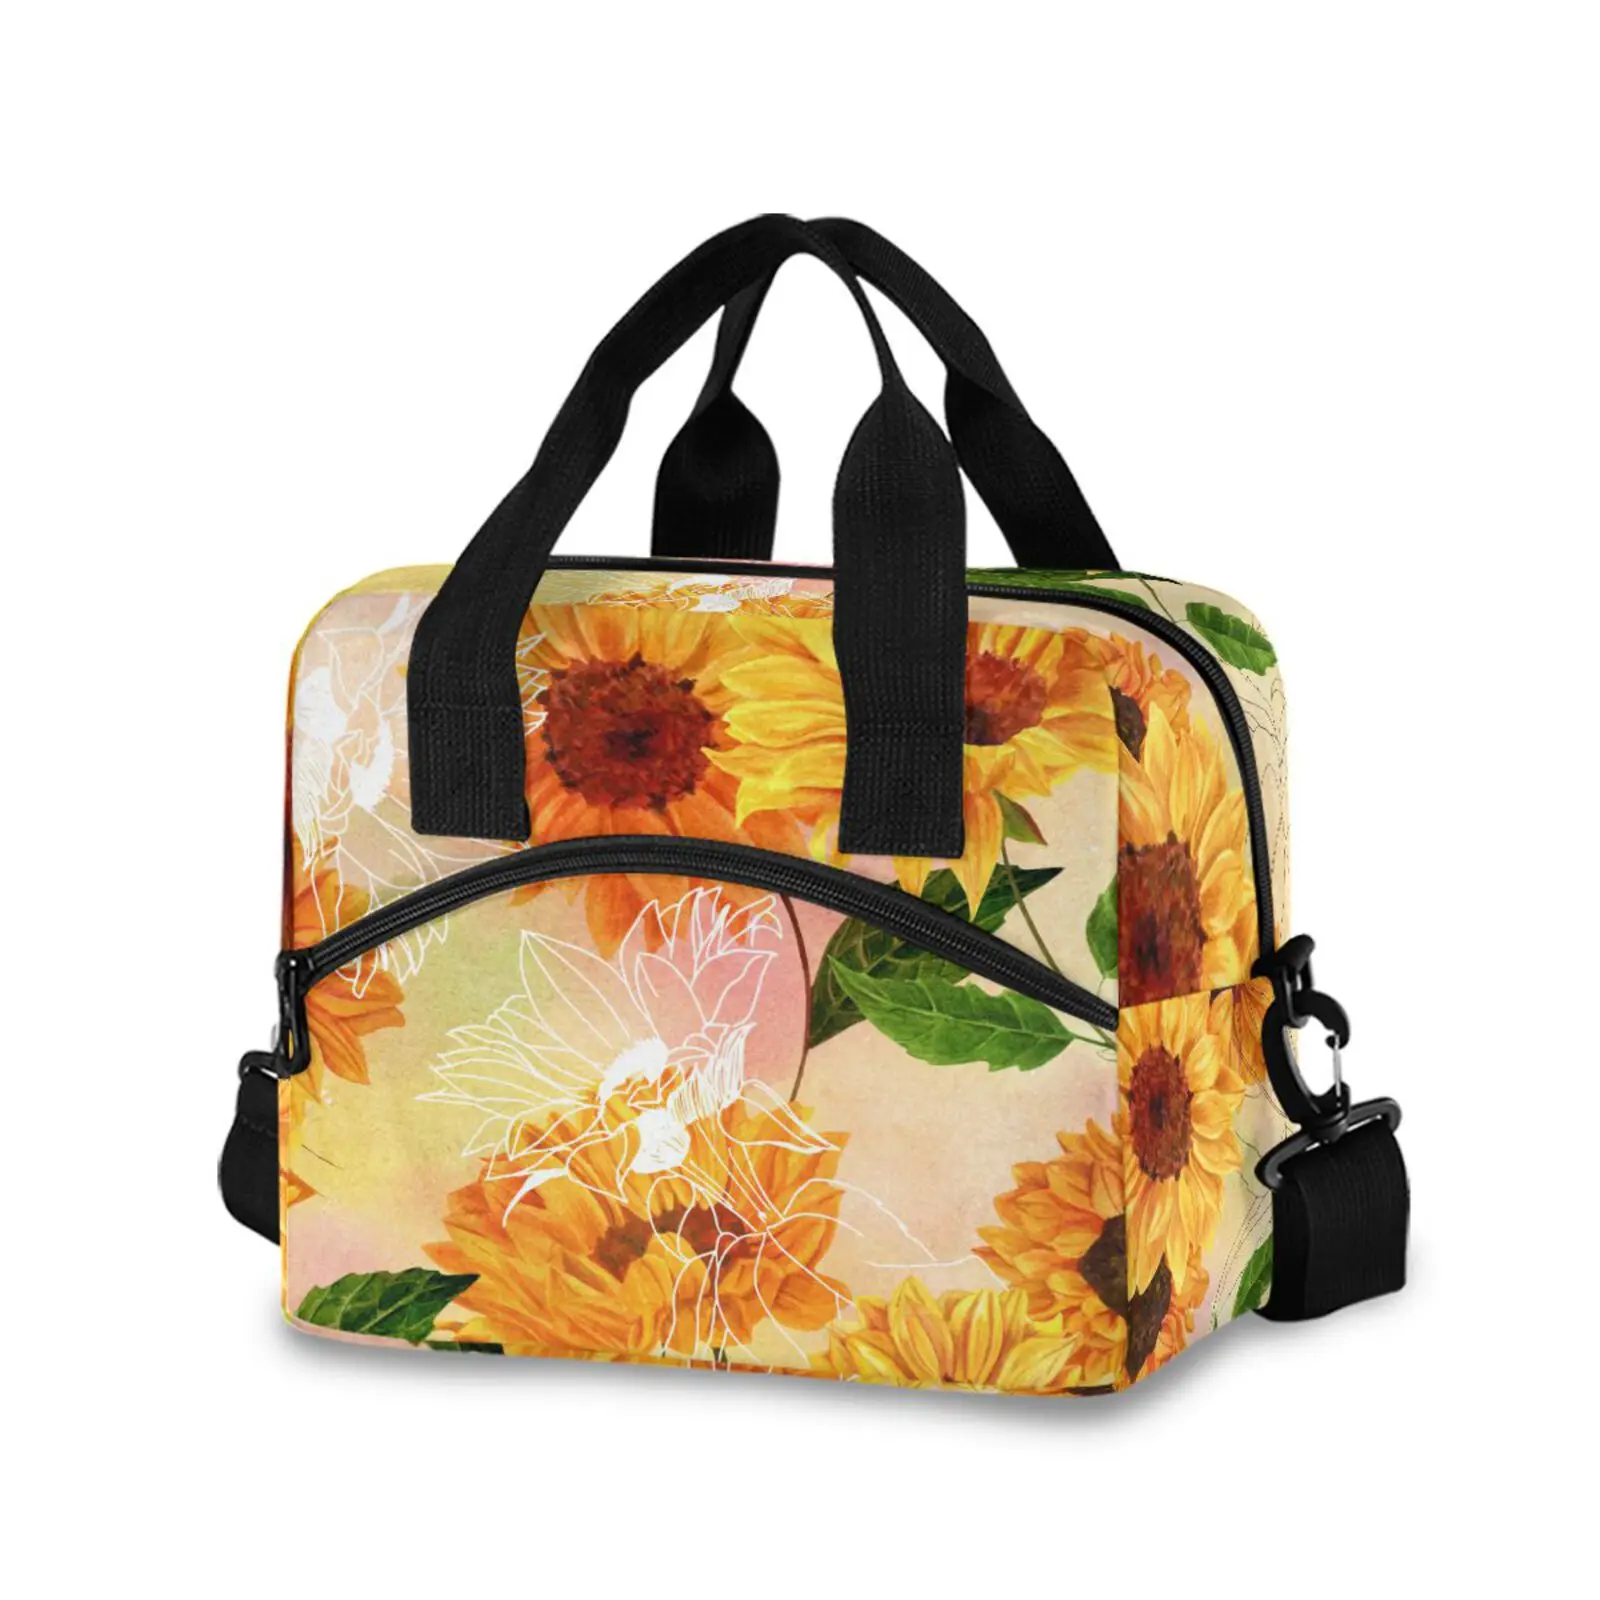 Fashion Lunch Bag Sunflower Print Multicolor Business Cooler Bags Women Hand Pack Thermal Breakfast Box Portable Picnic Travel